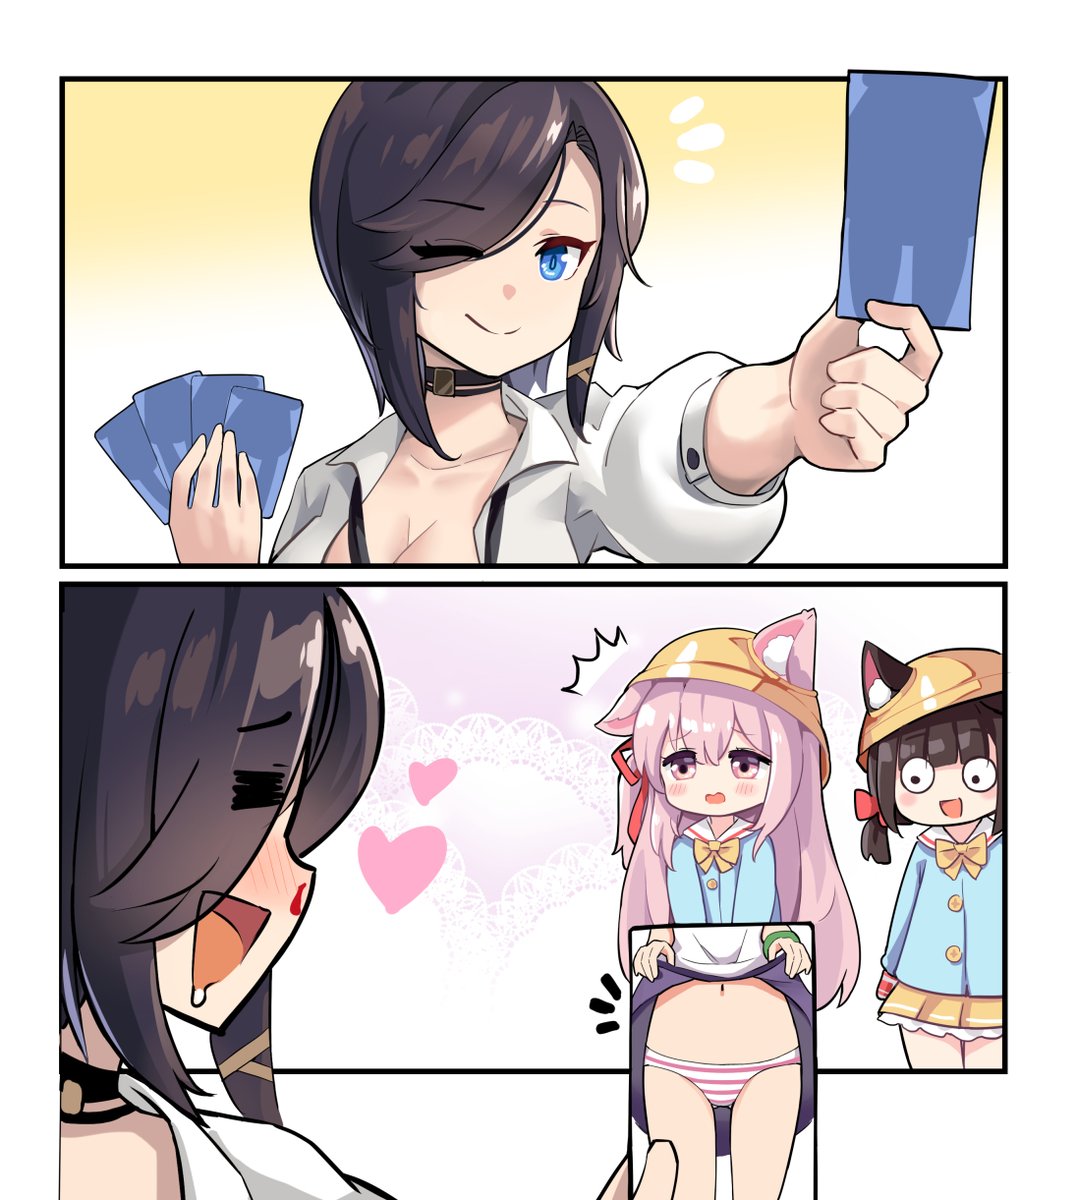 How Ark Royal plays cards.

https://t.co/cFFsvSILWg

#アズールレーン #AzurLane 